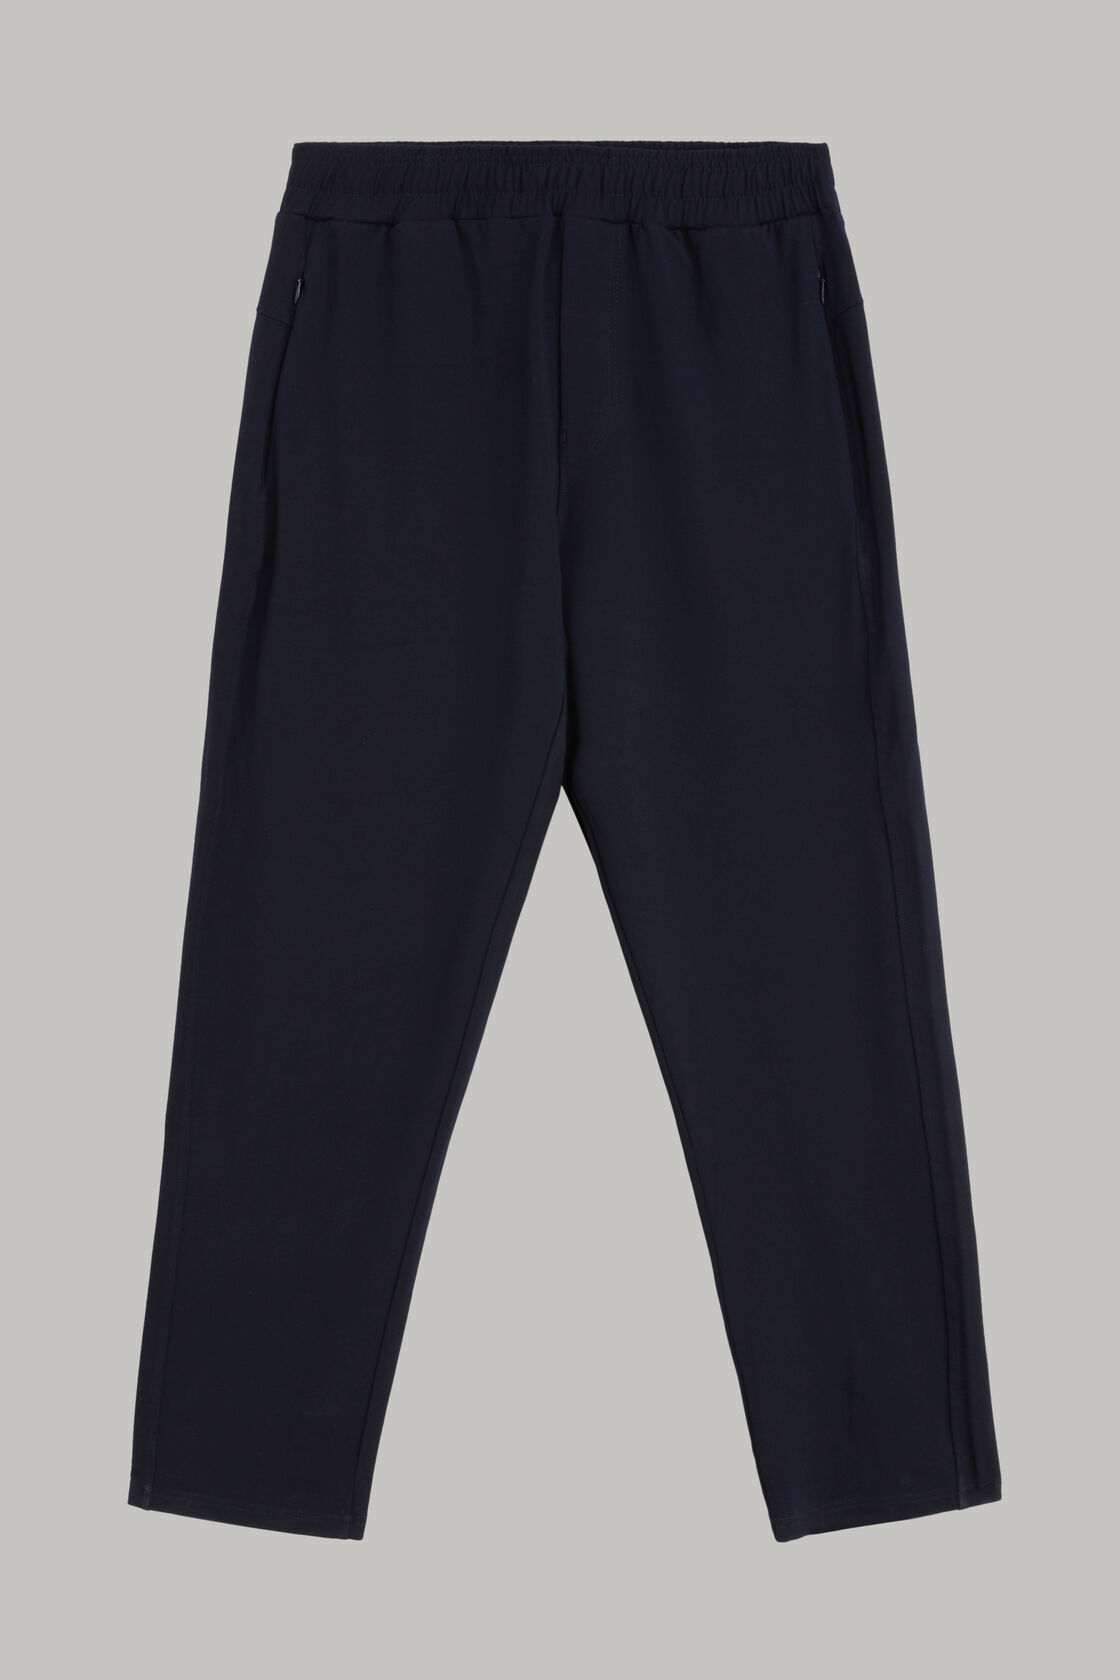 Stretch modal coulisse pant, , hi-res